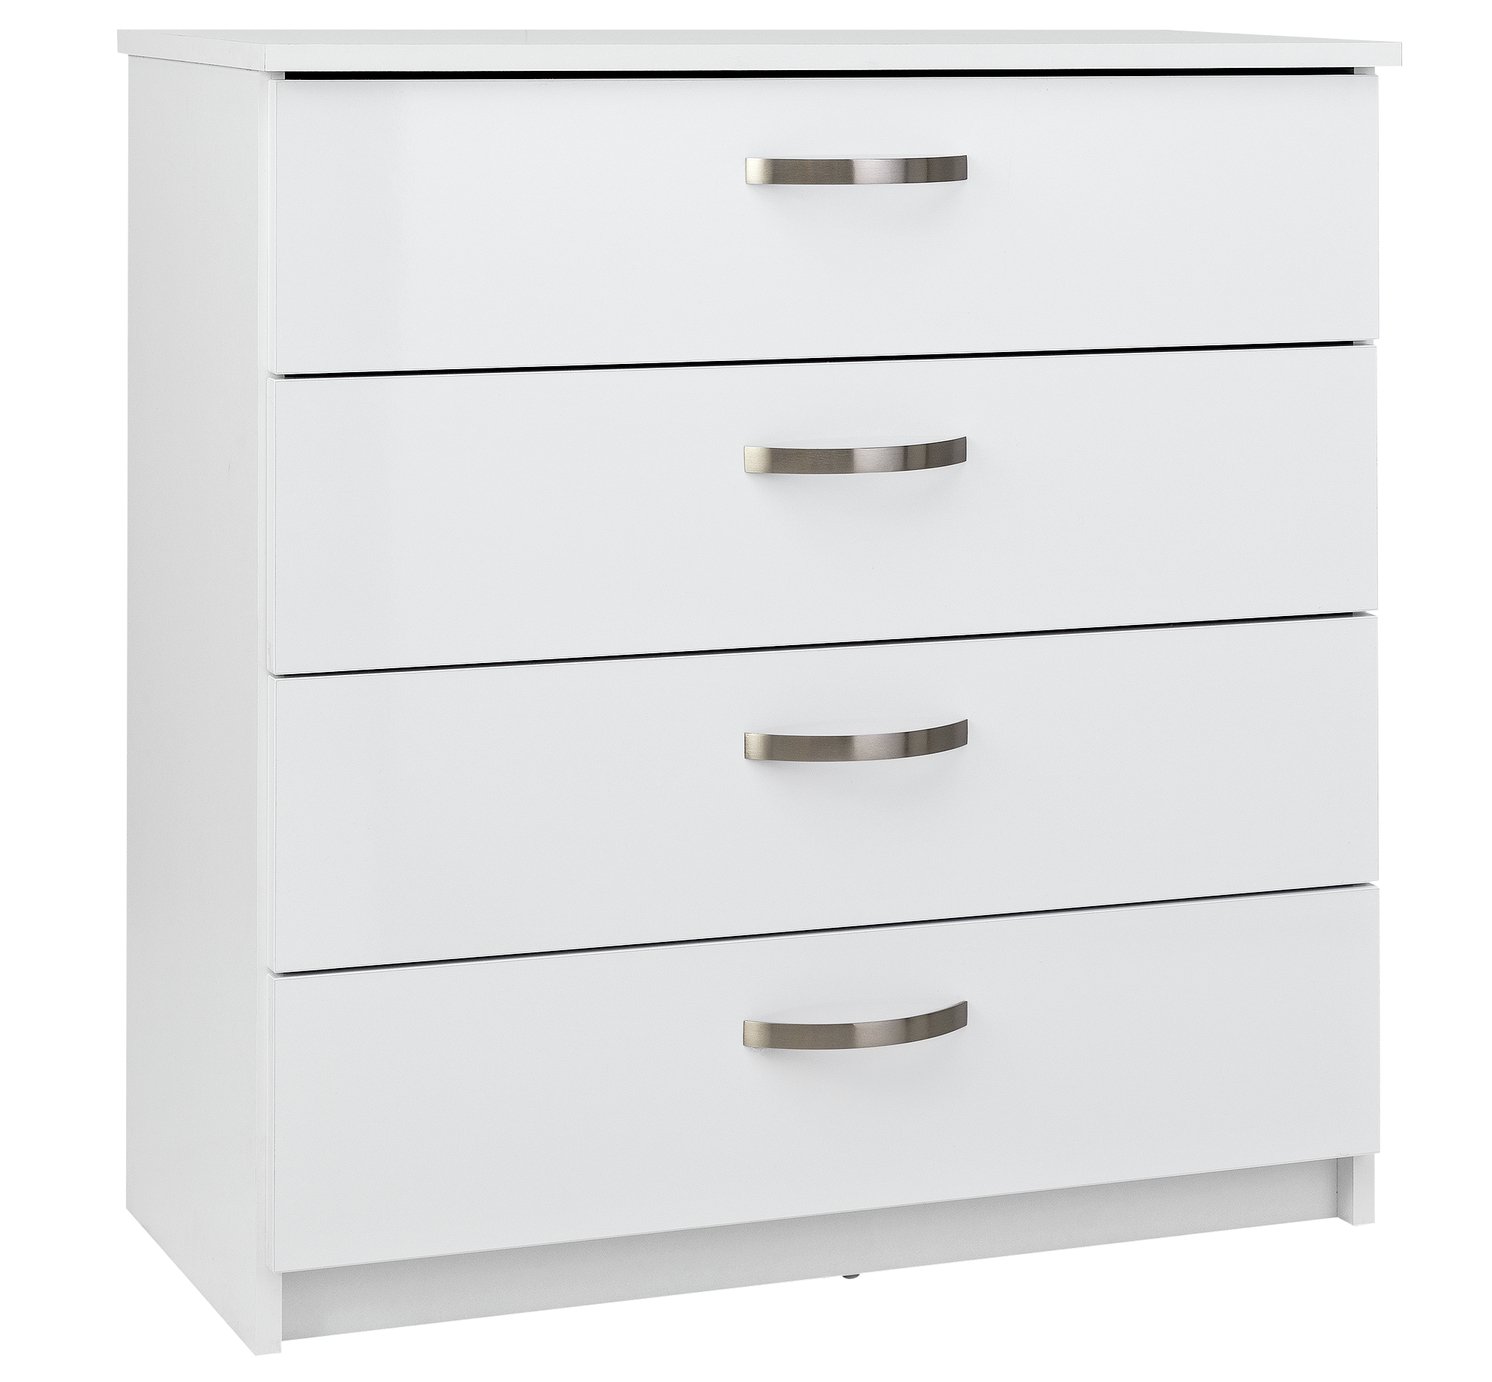 Argos Home Cheval Gloss 4 Drawer Chest of Drawers - White